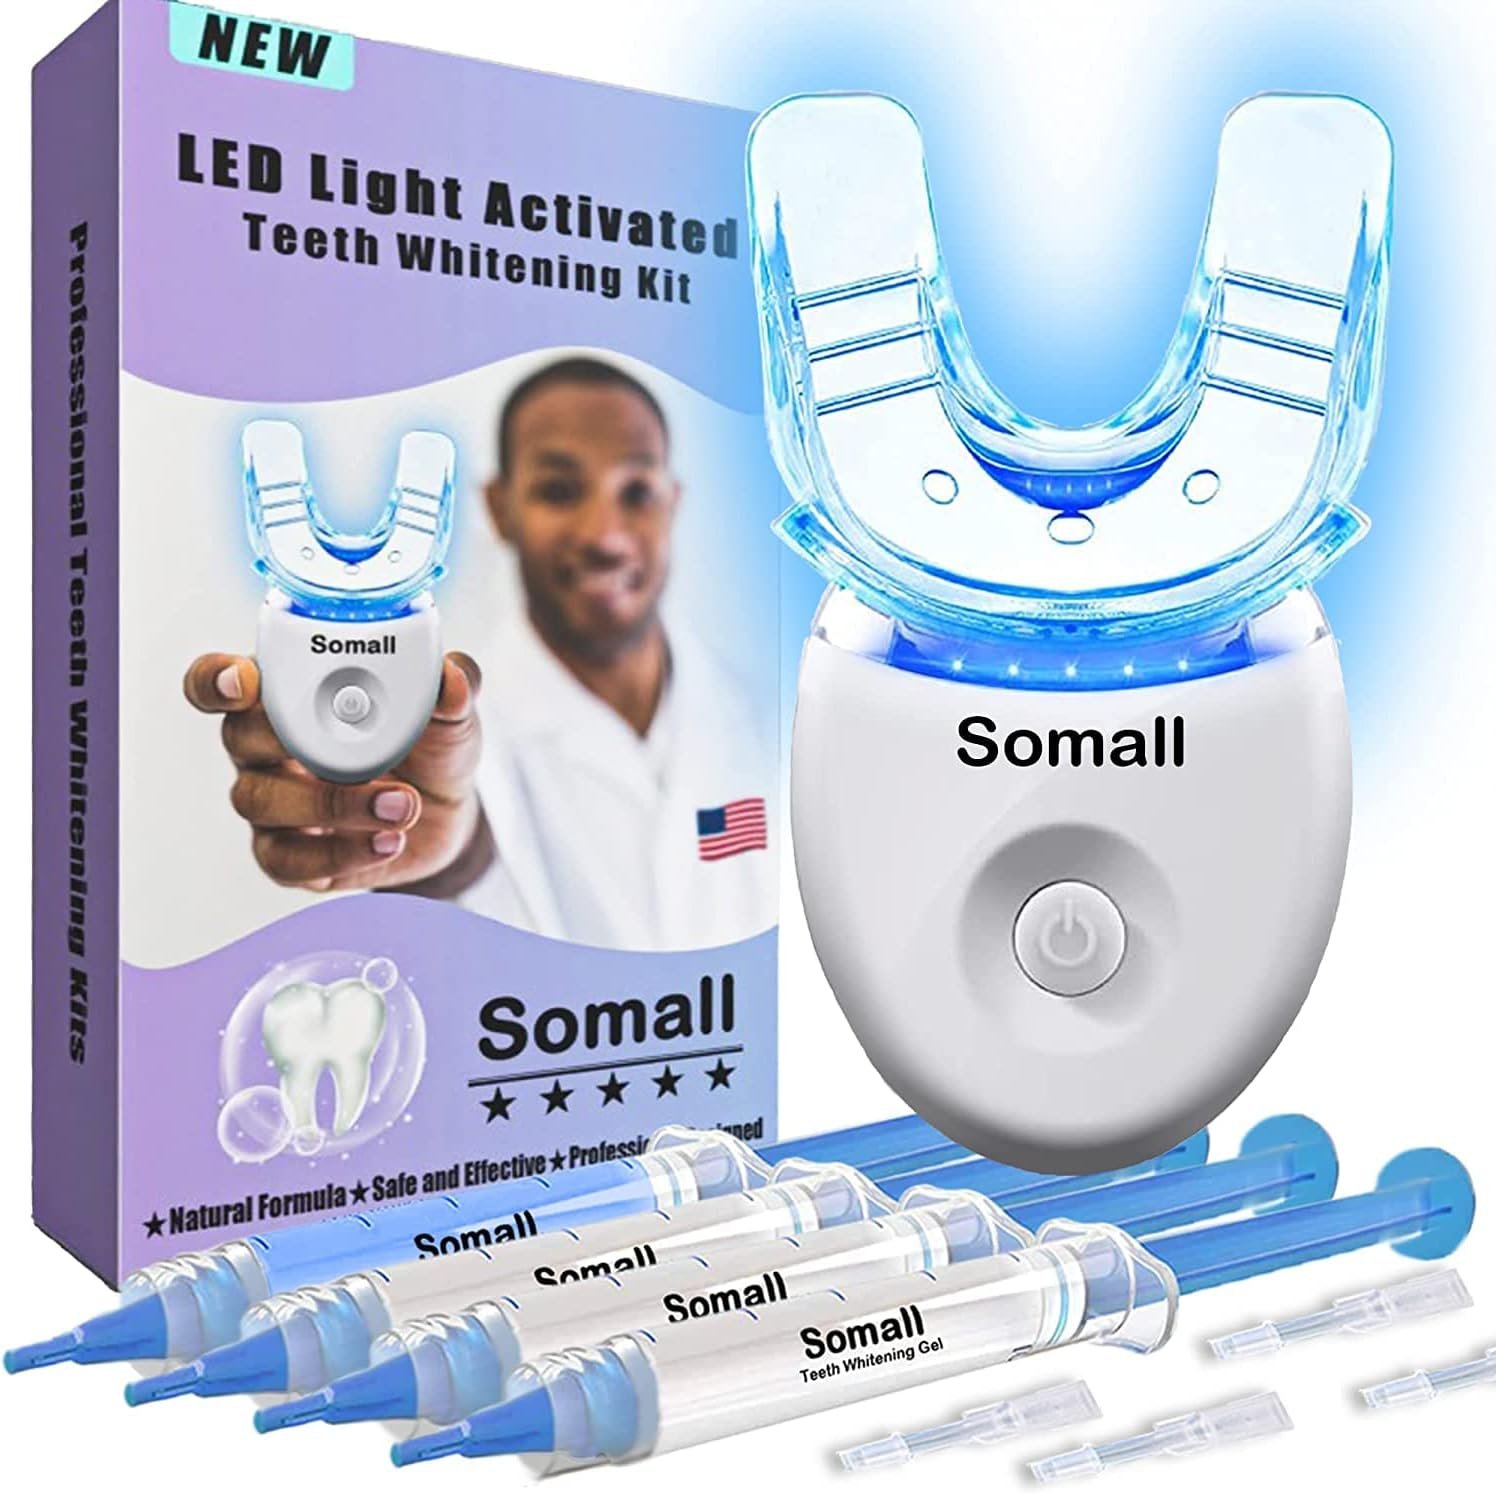 Somall Teeth Whitening LED Accelerator Lights Kit , More Dentist Recommended Professional Teeth Whitening Kits -Mild and Insensitive Fast Tooth Whitener - Get Long-Lasting Whitening Effect